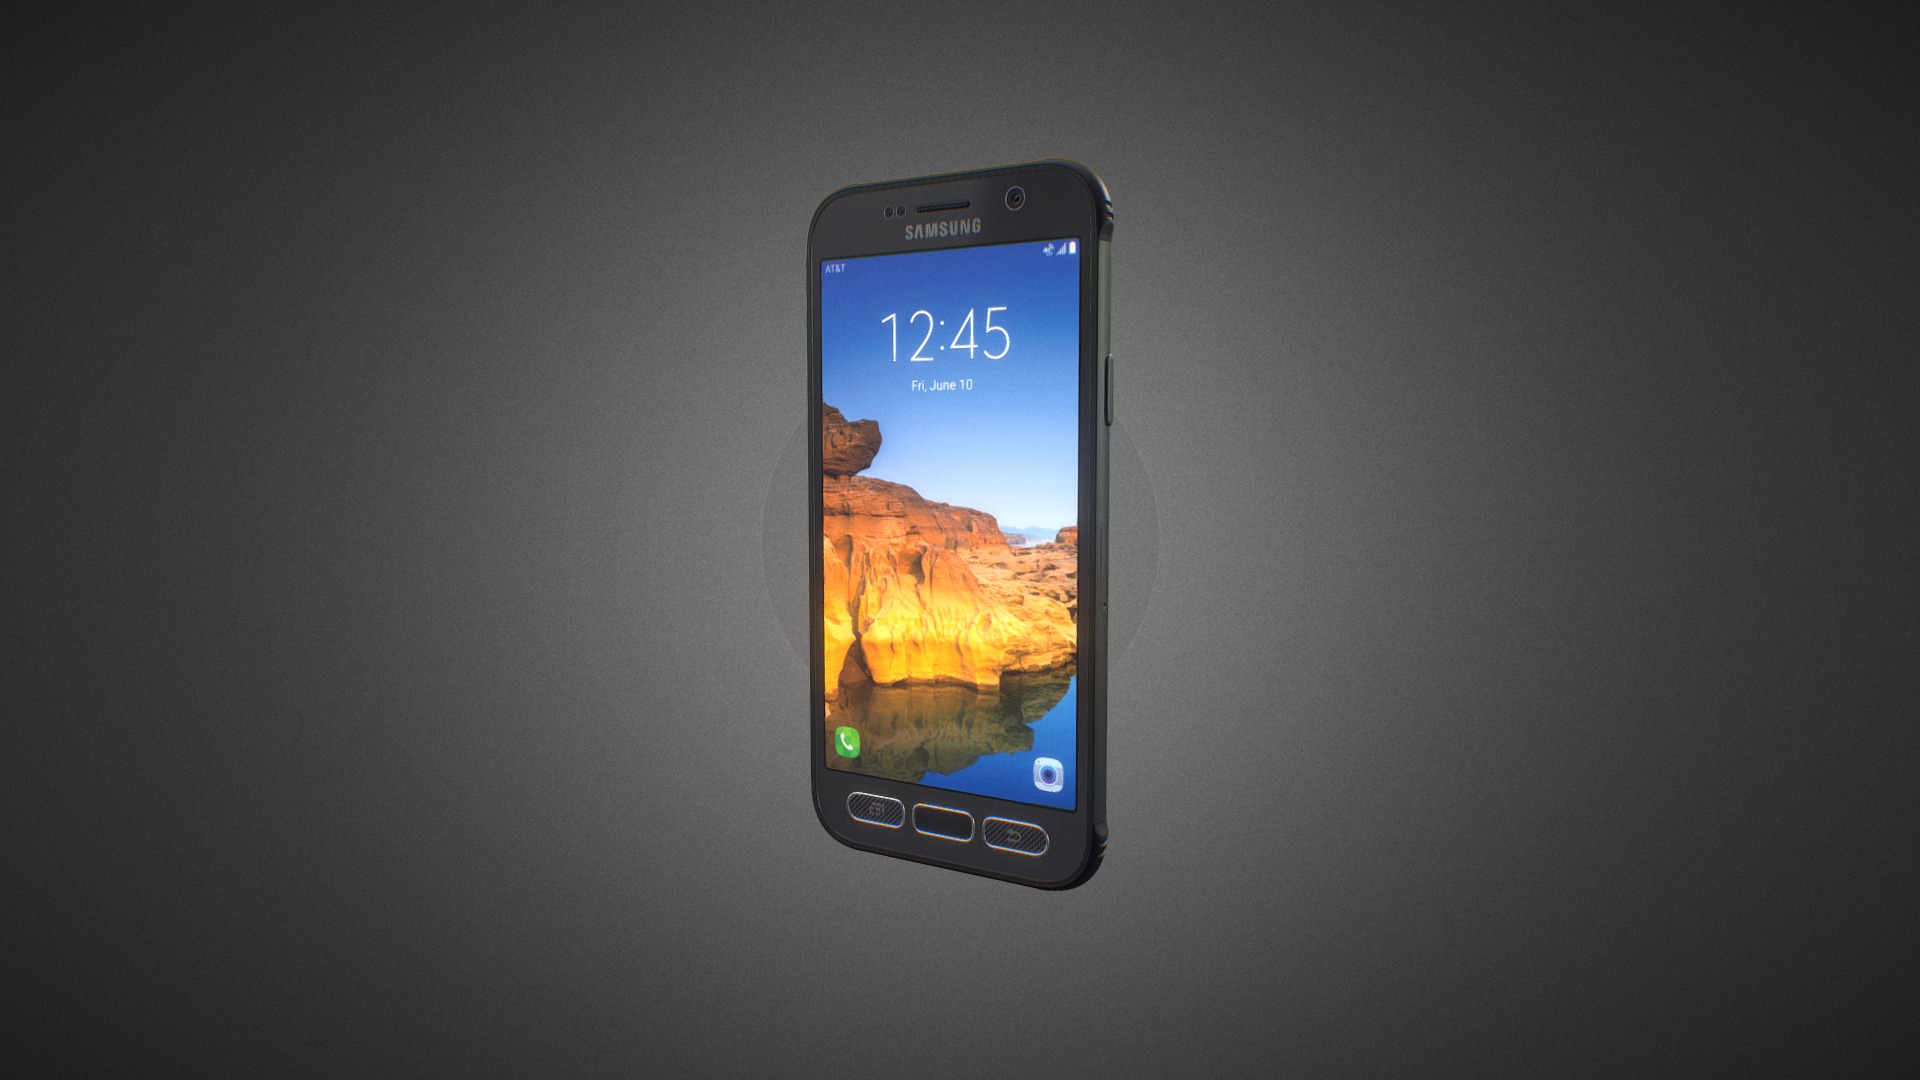 3D model Samsung Galaxy S7 Active for Element 3D - This is a 3D model of the Samsung Galaxy S7 Active for Element 3D. The 3D model is about a cell phone with a map on the screen.